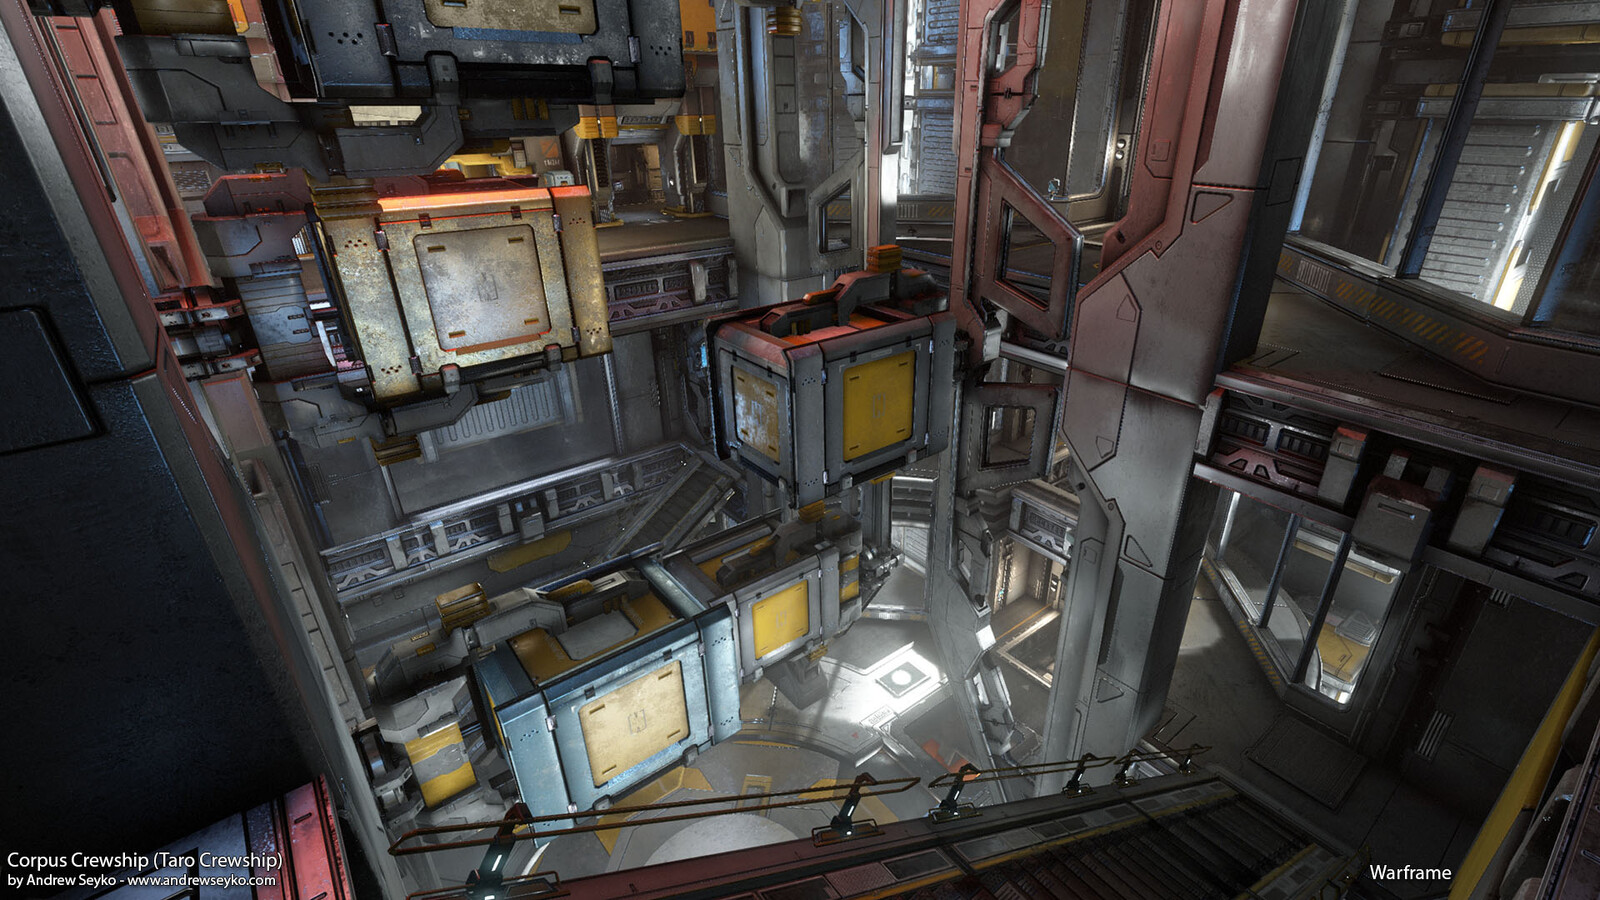 Cargo Variation of the Level. The Objective in this version, is to access vents in the ceiling to raise the reactor. 